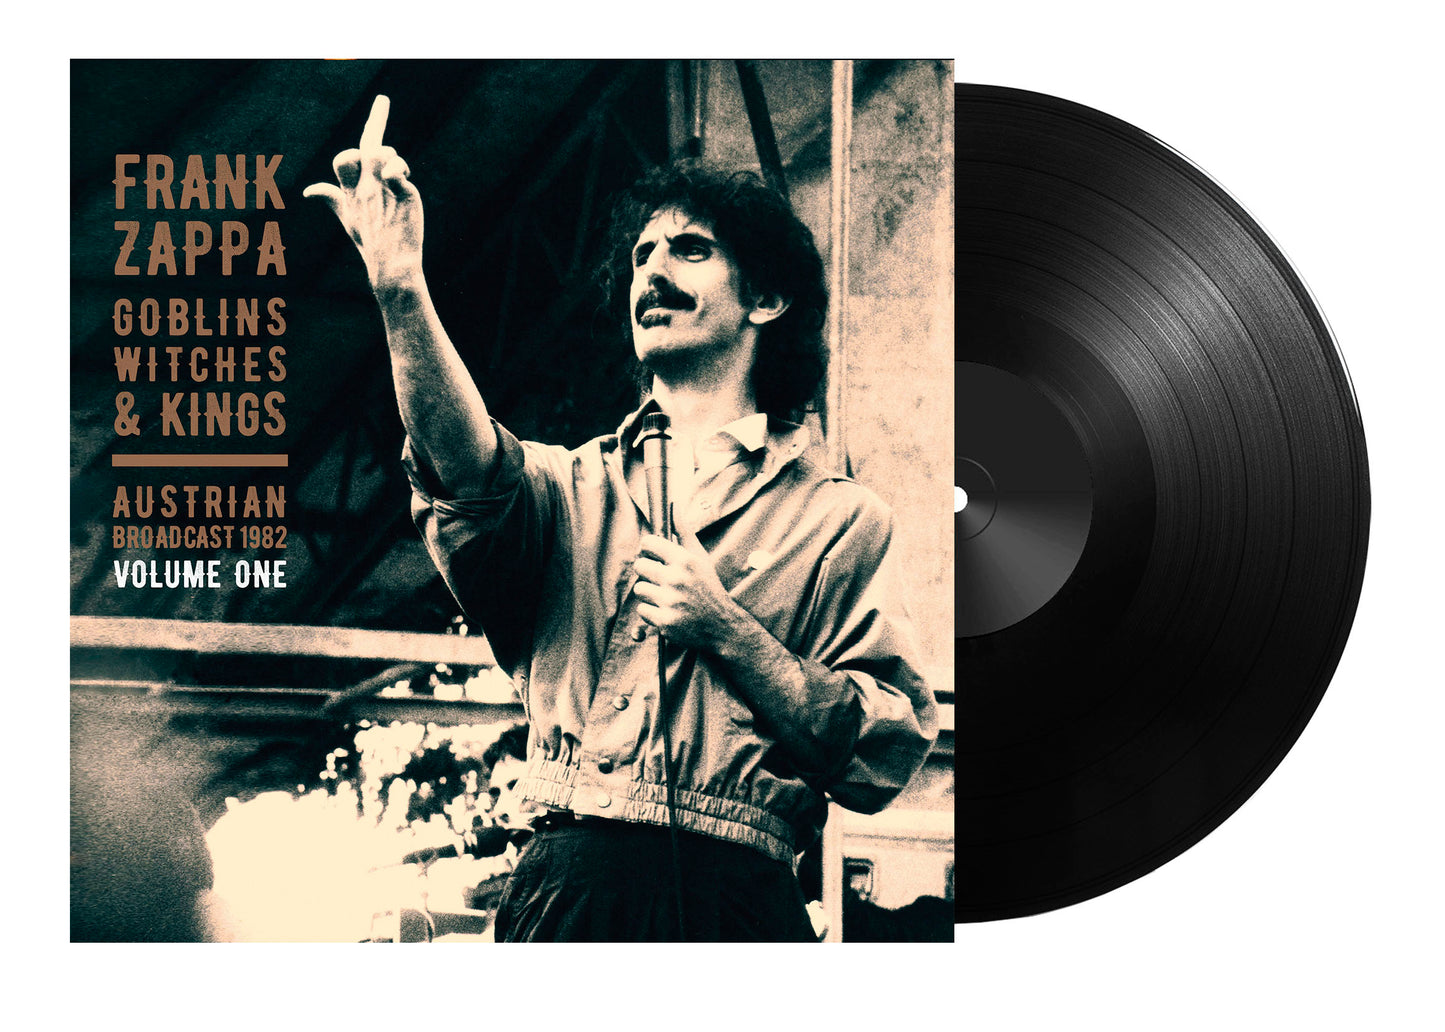 Frank Zappa Goblins, Witches & Kings: The Austrian Broadcast 1982 Vol.1 (Limited Edition, 2 LP) | Vinyl